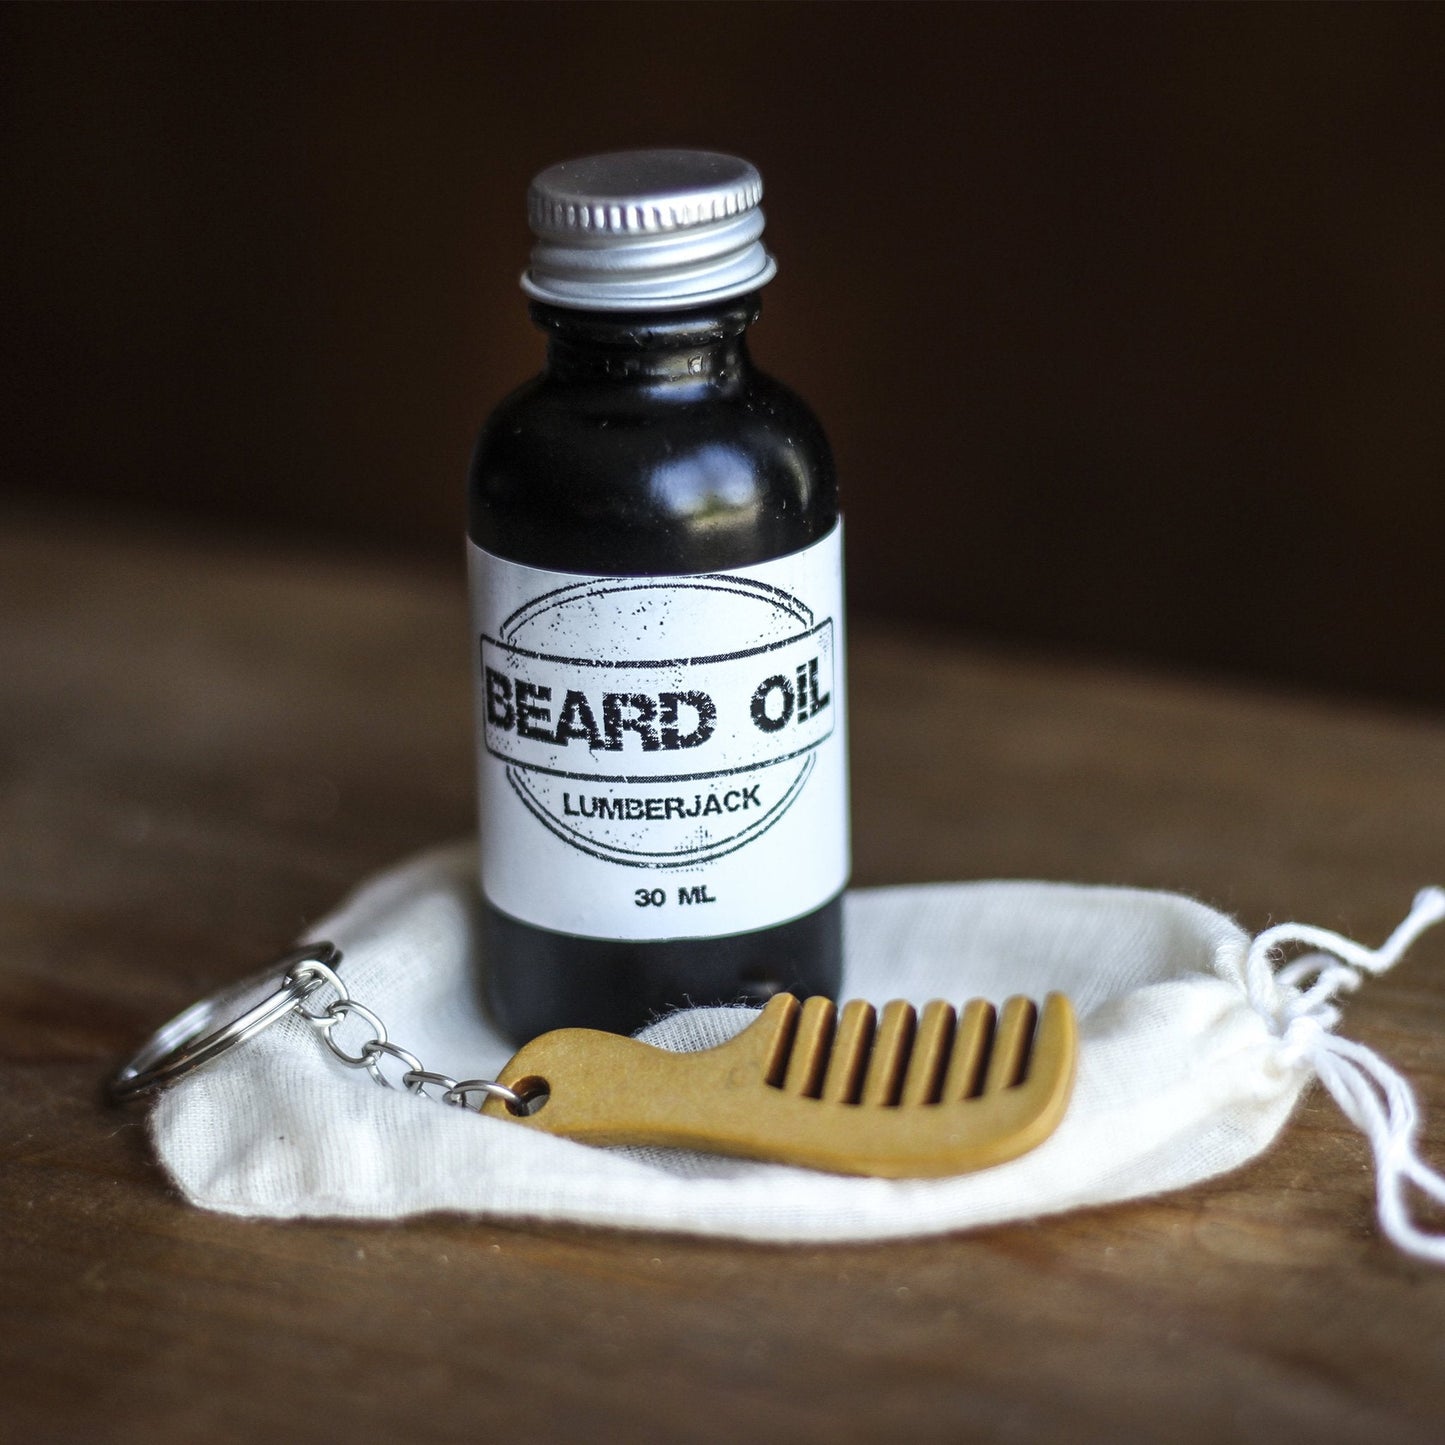 Beard Oil Gift Set in Retail Box | 10 Scents Available